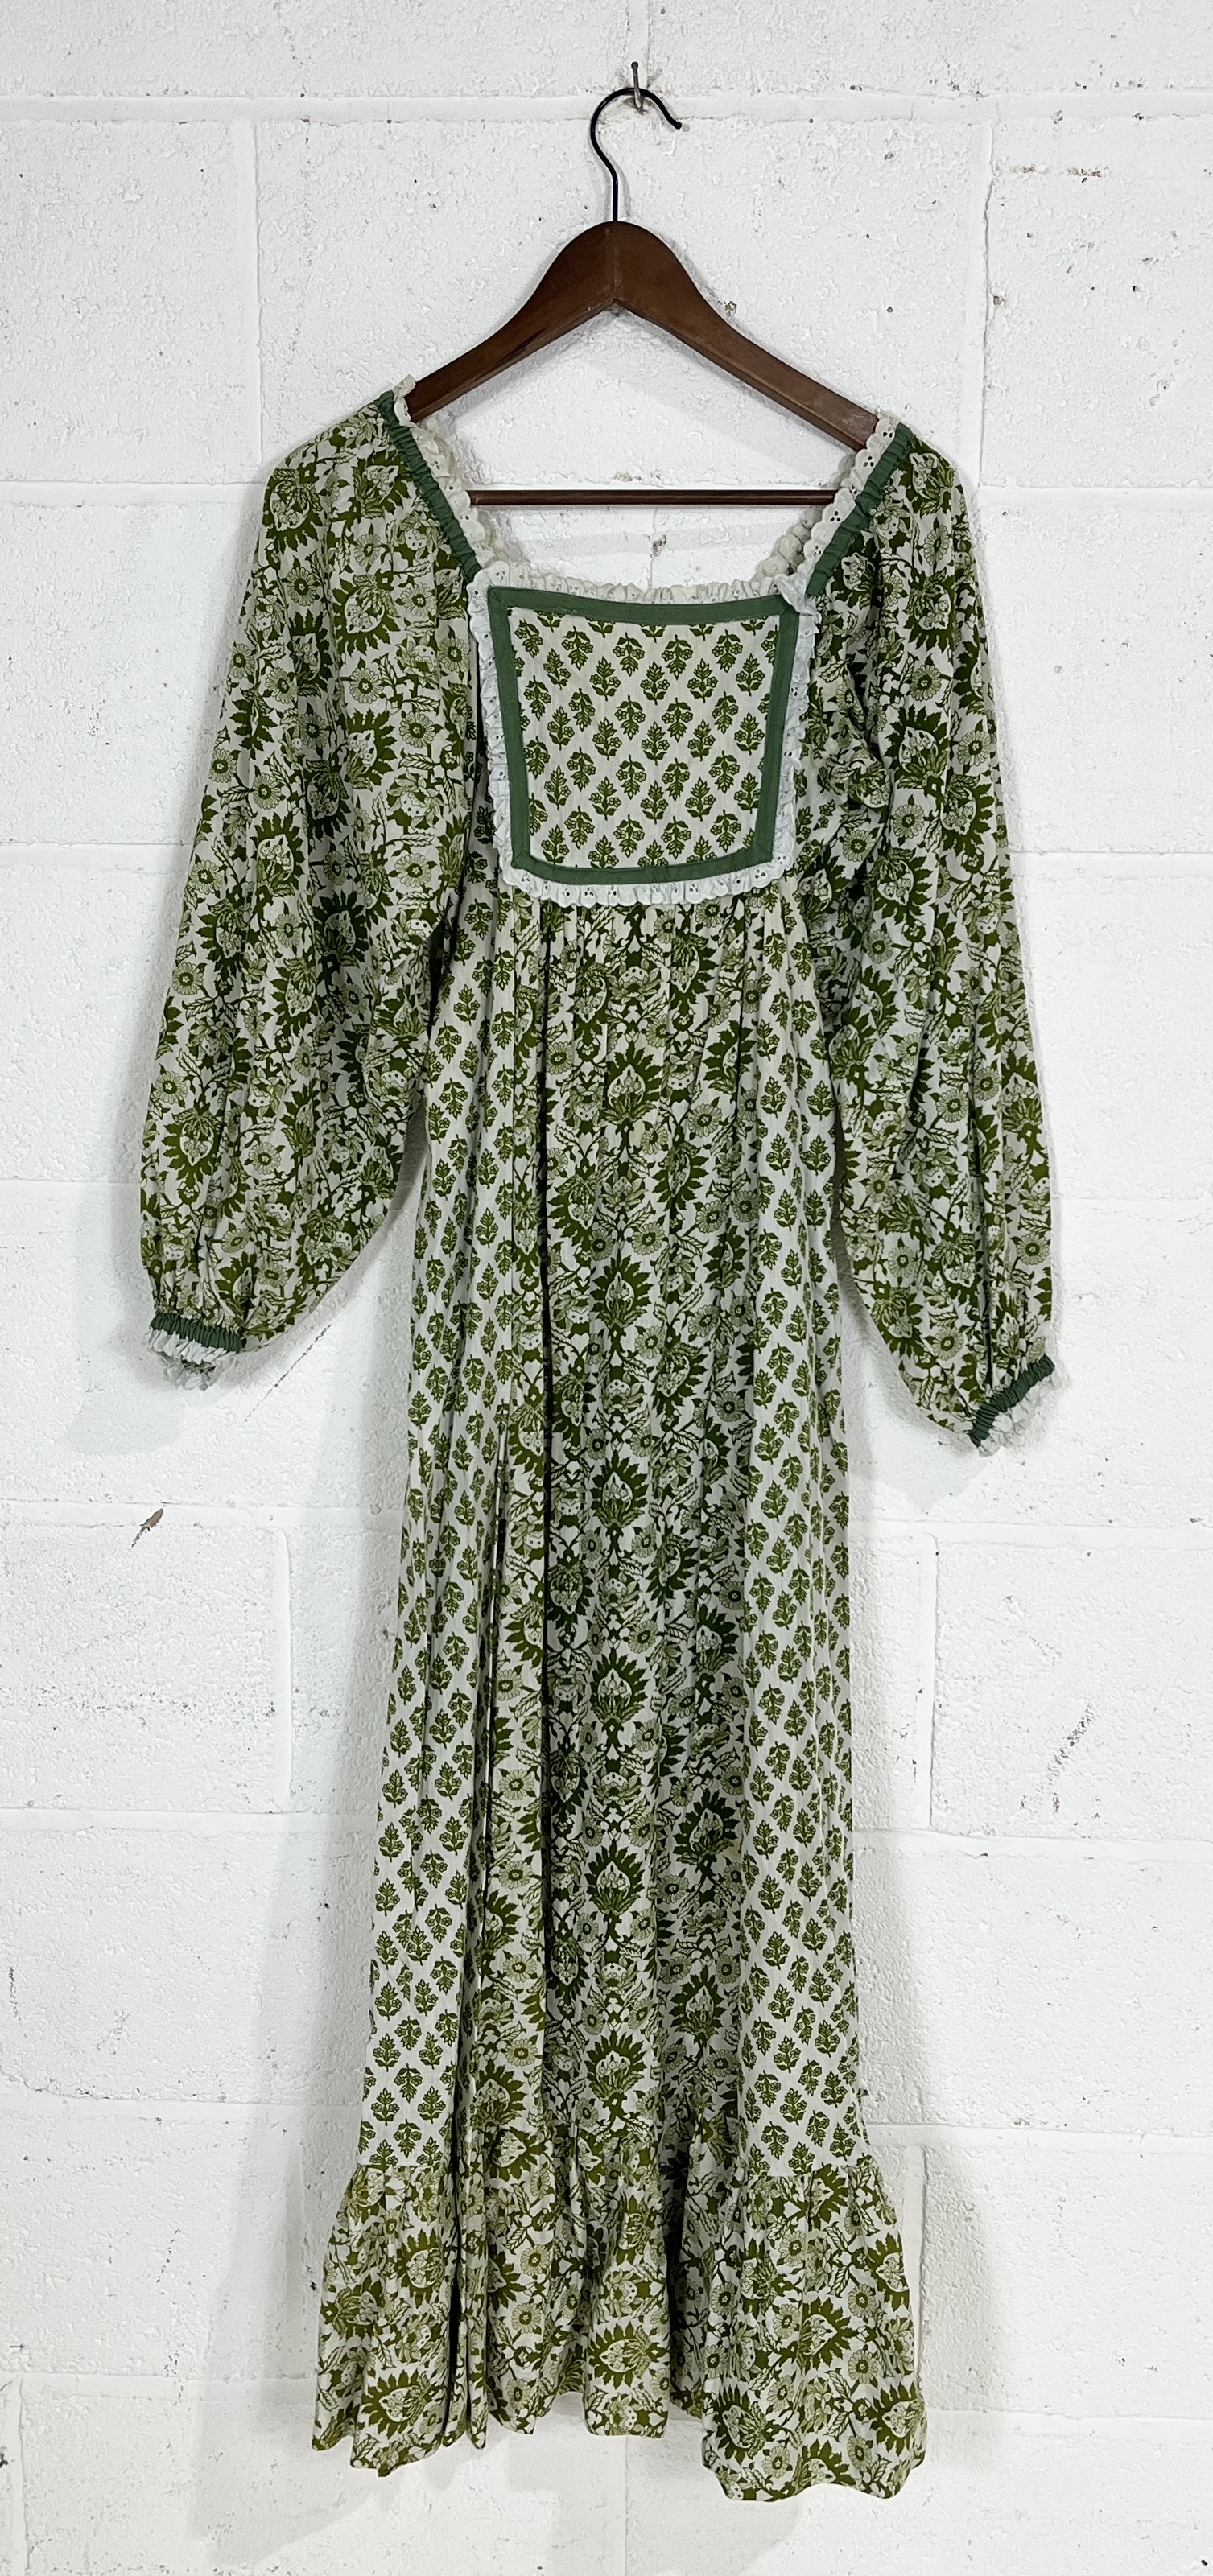 Three vintage 1970's full length dresses including an Earlybird prairie dress, Mister Ant striped - Image 2 of 12